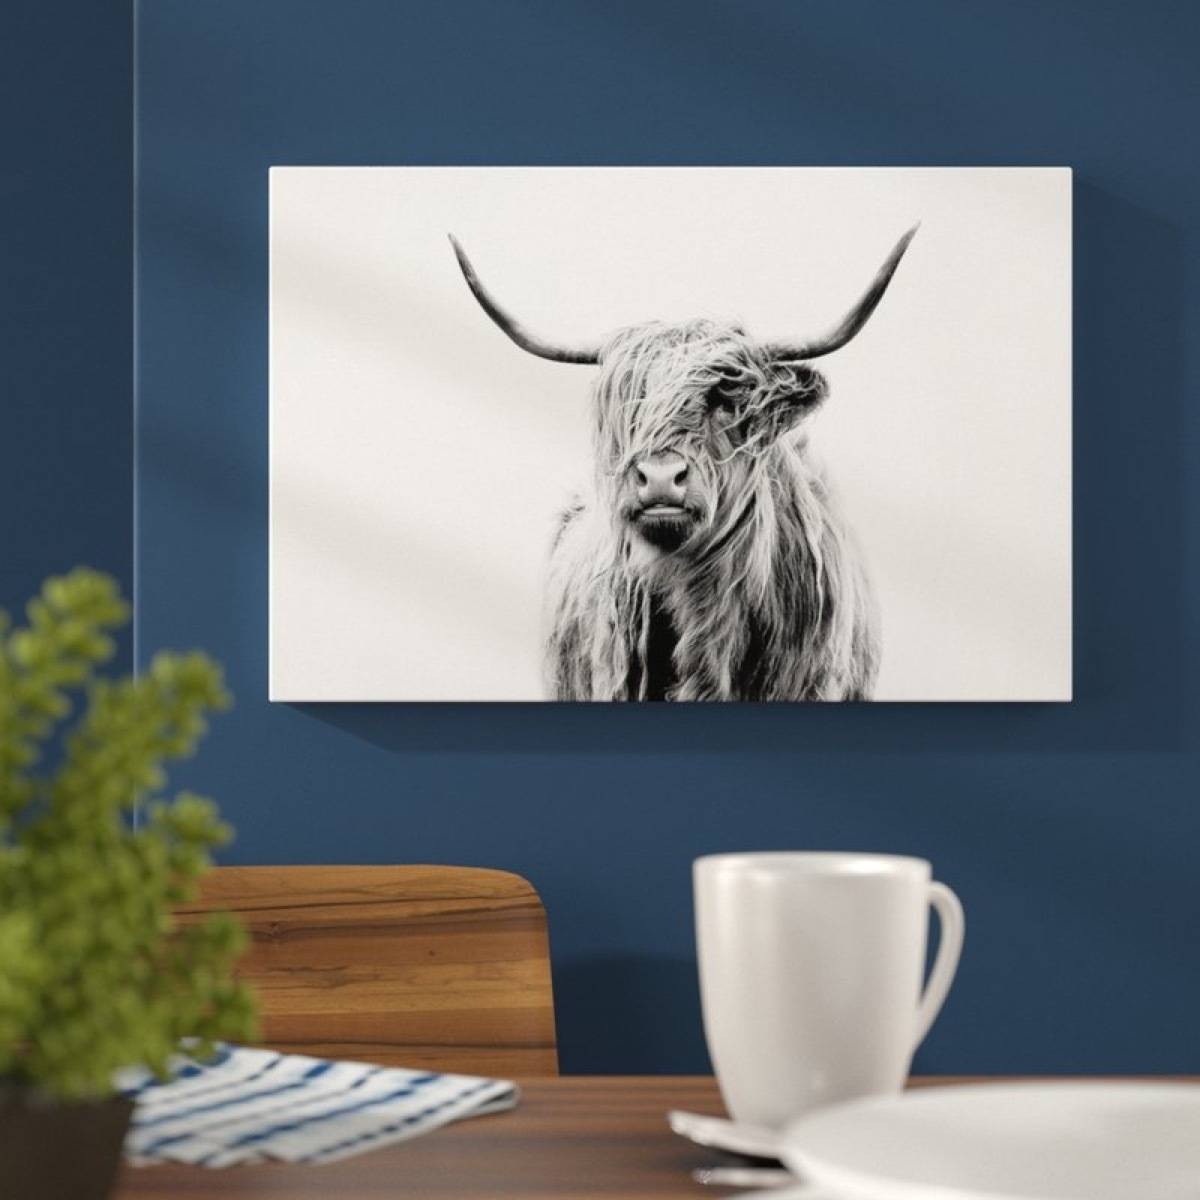 Cheap home decor and affordable furniture - Canvas wall art from All Modern